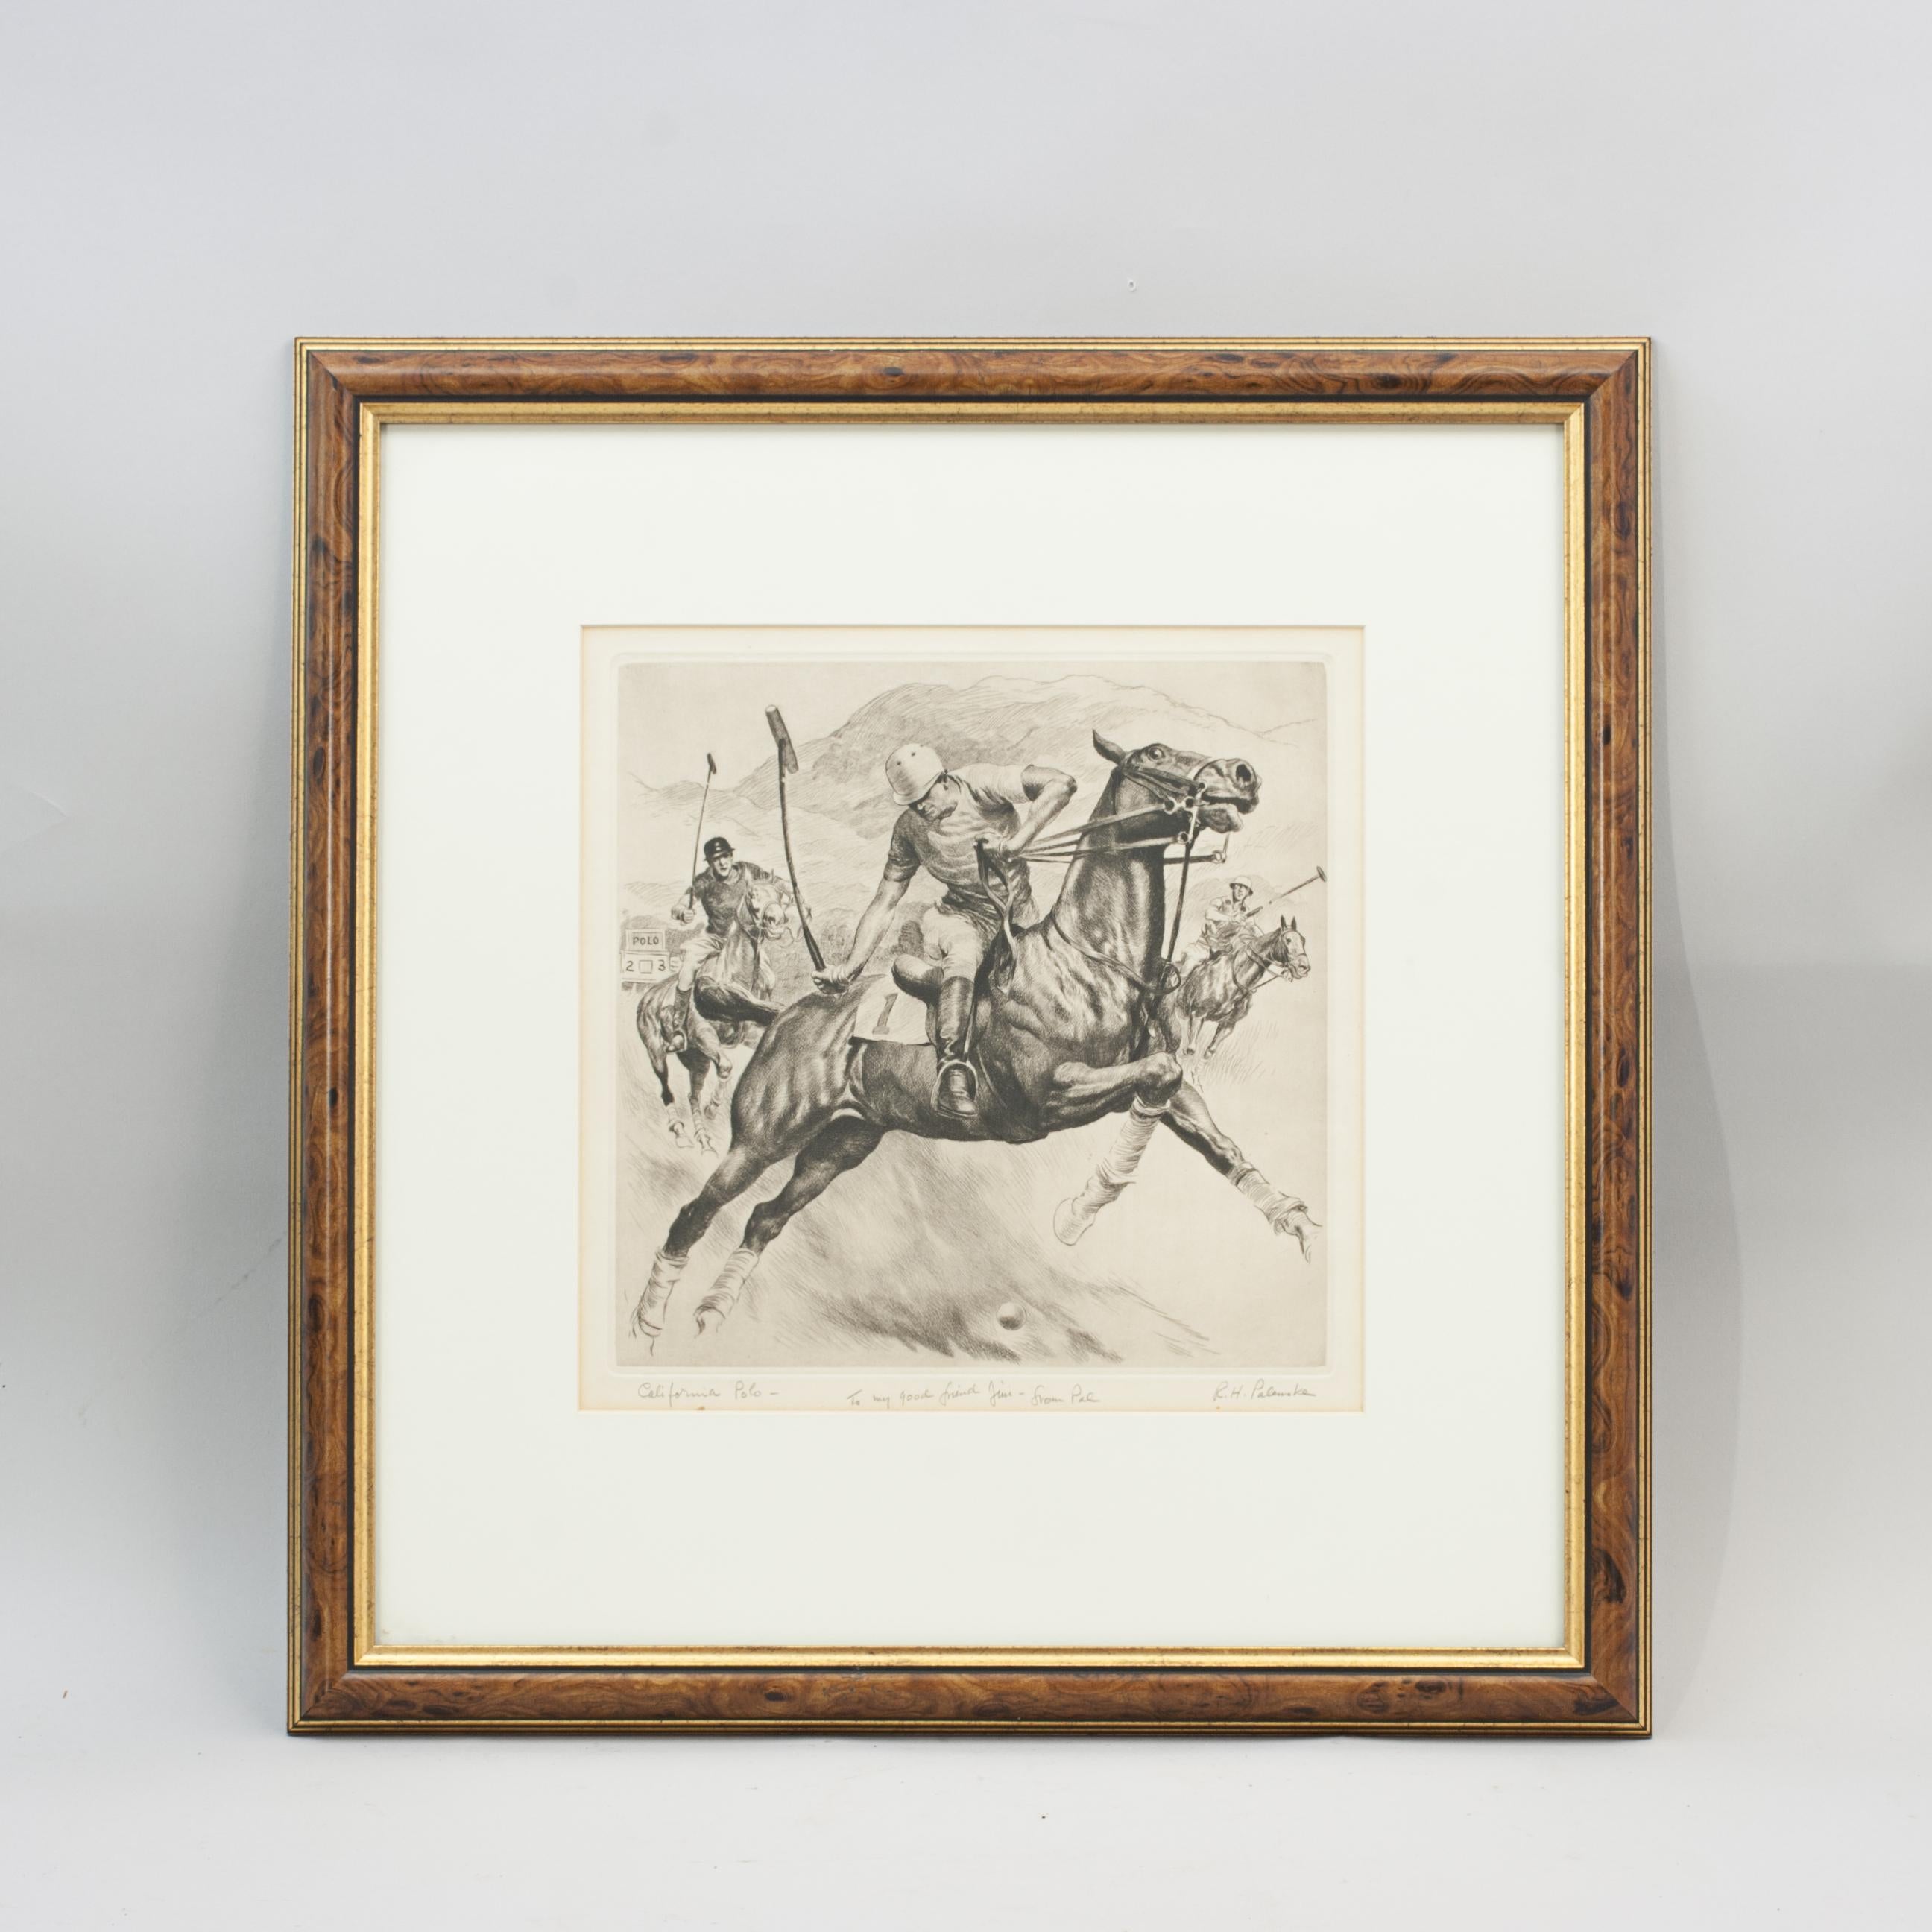 California Polo Etching.
A wonderful dry-point etching of Polo in America by American artist Reinhold H. Palenske (1884-1953). Inscribed and signed by the artist 